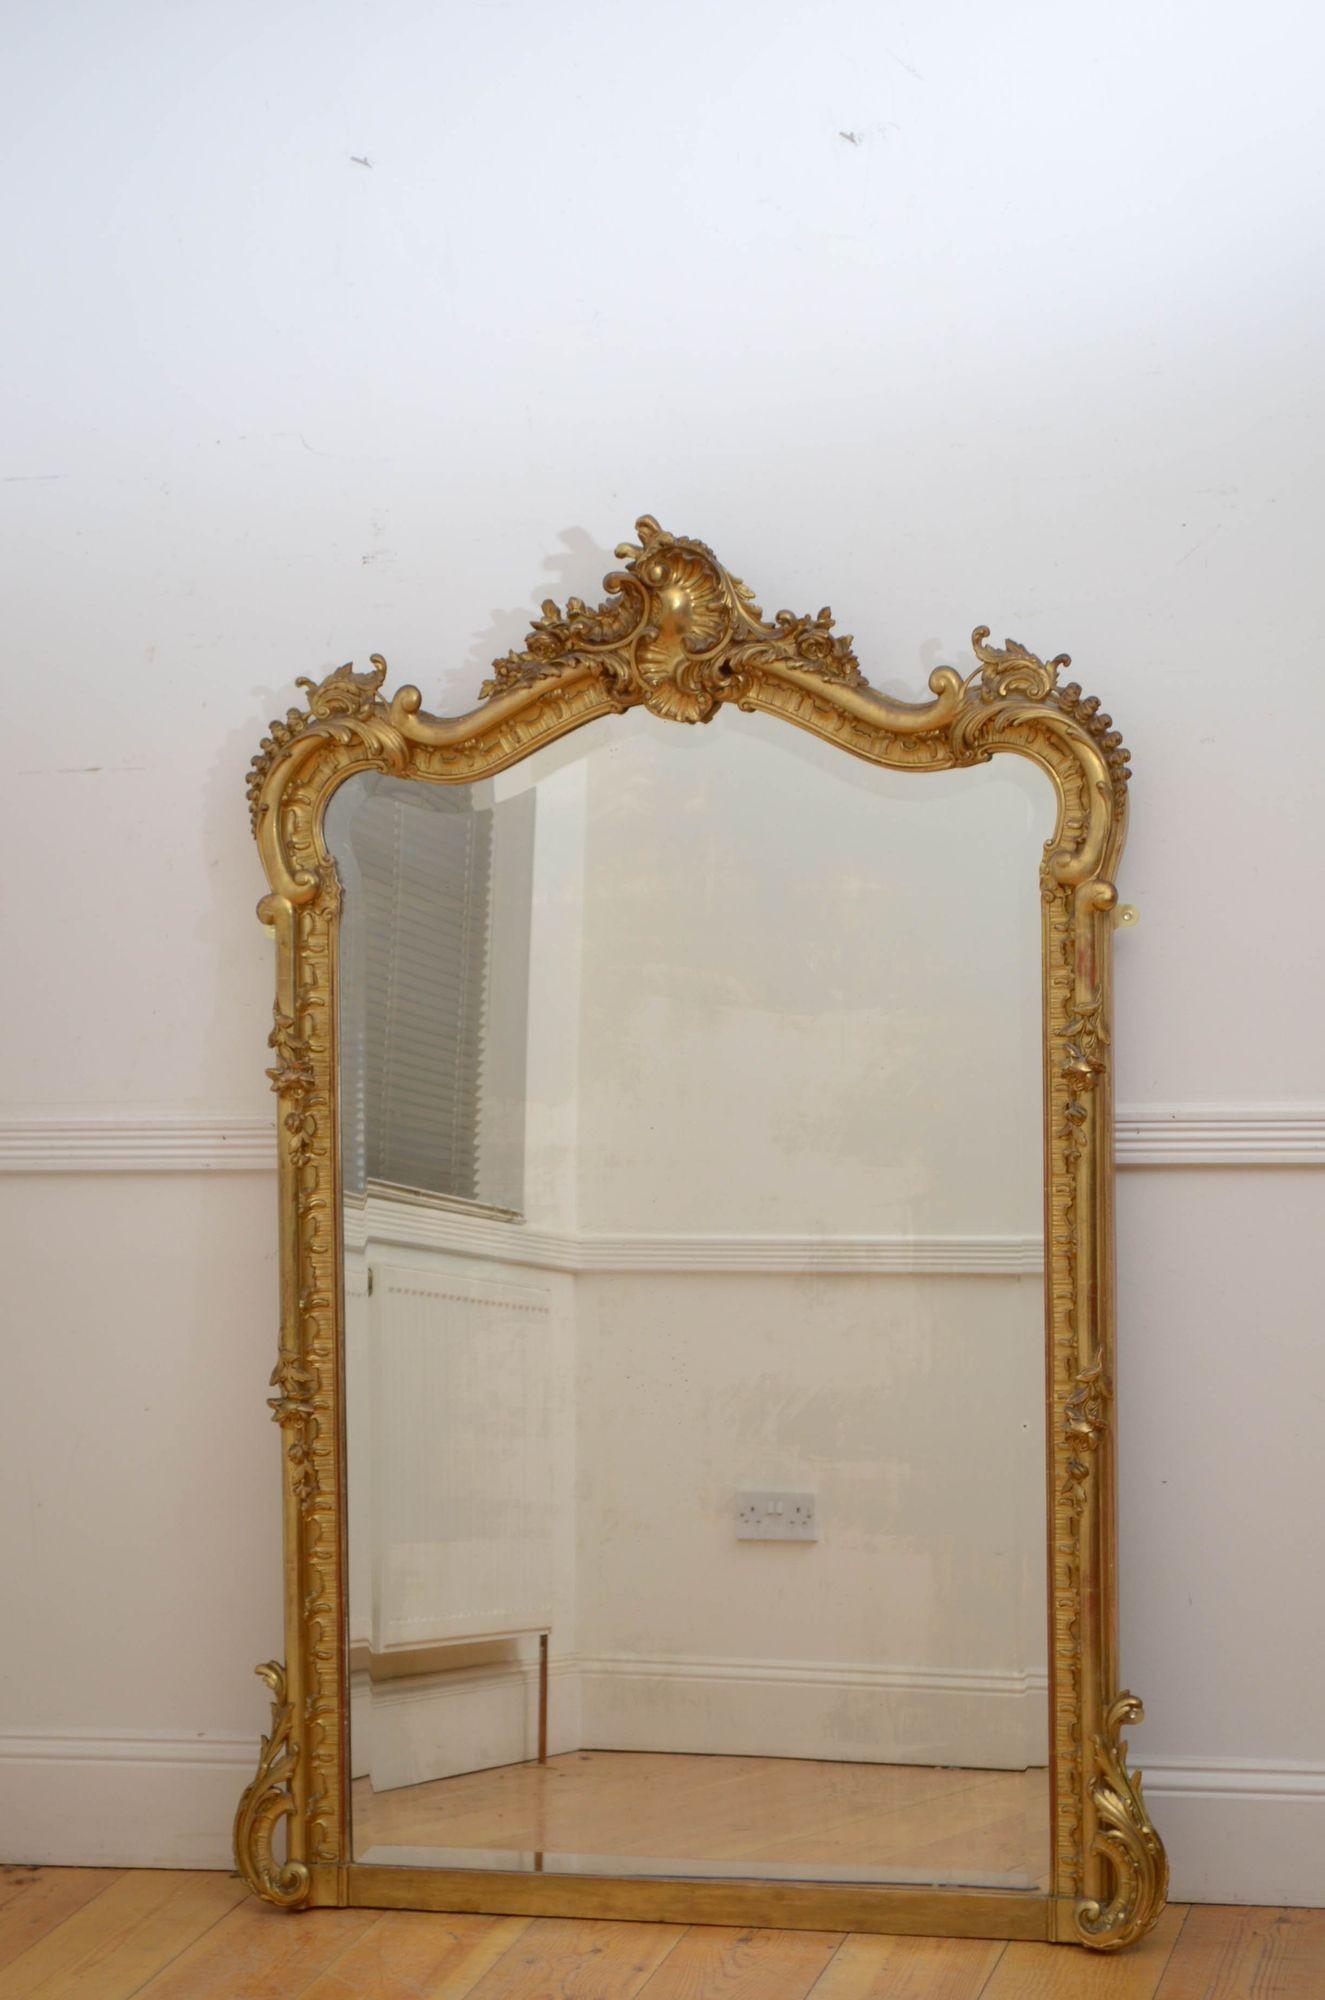 Sn5479 Superb 19th century French gilded wall mirror, having original bevelled edge glass with some imperfections in moulded, scallop carved and gilded frame with shell centre crest flanked by floral and leaf motifs and foliage scrolls to the base.